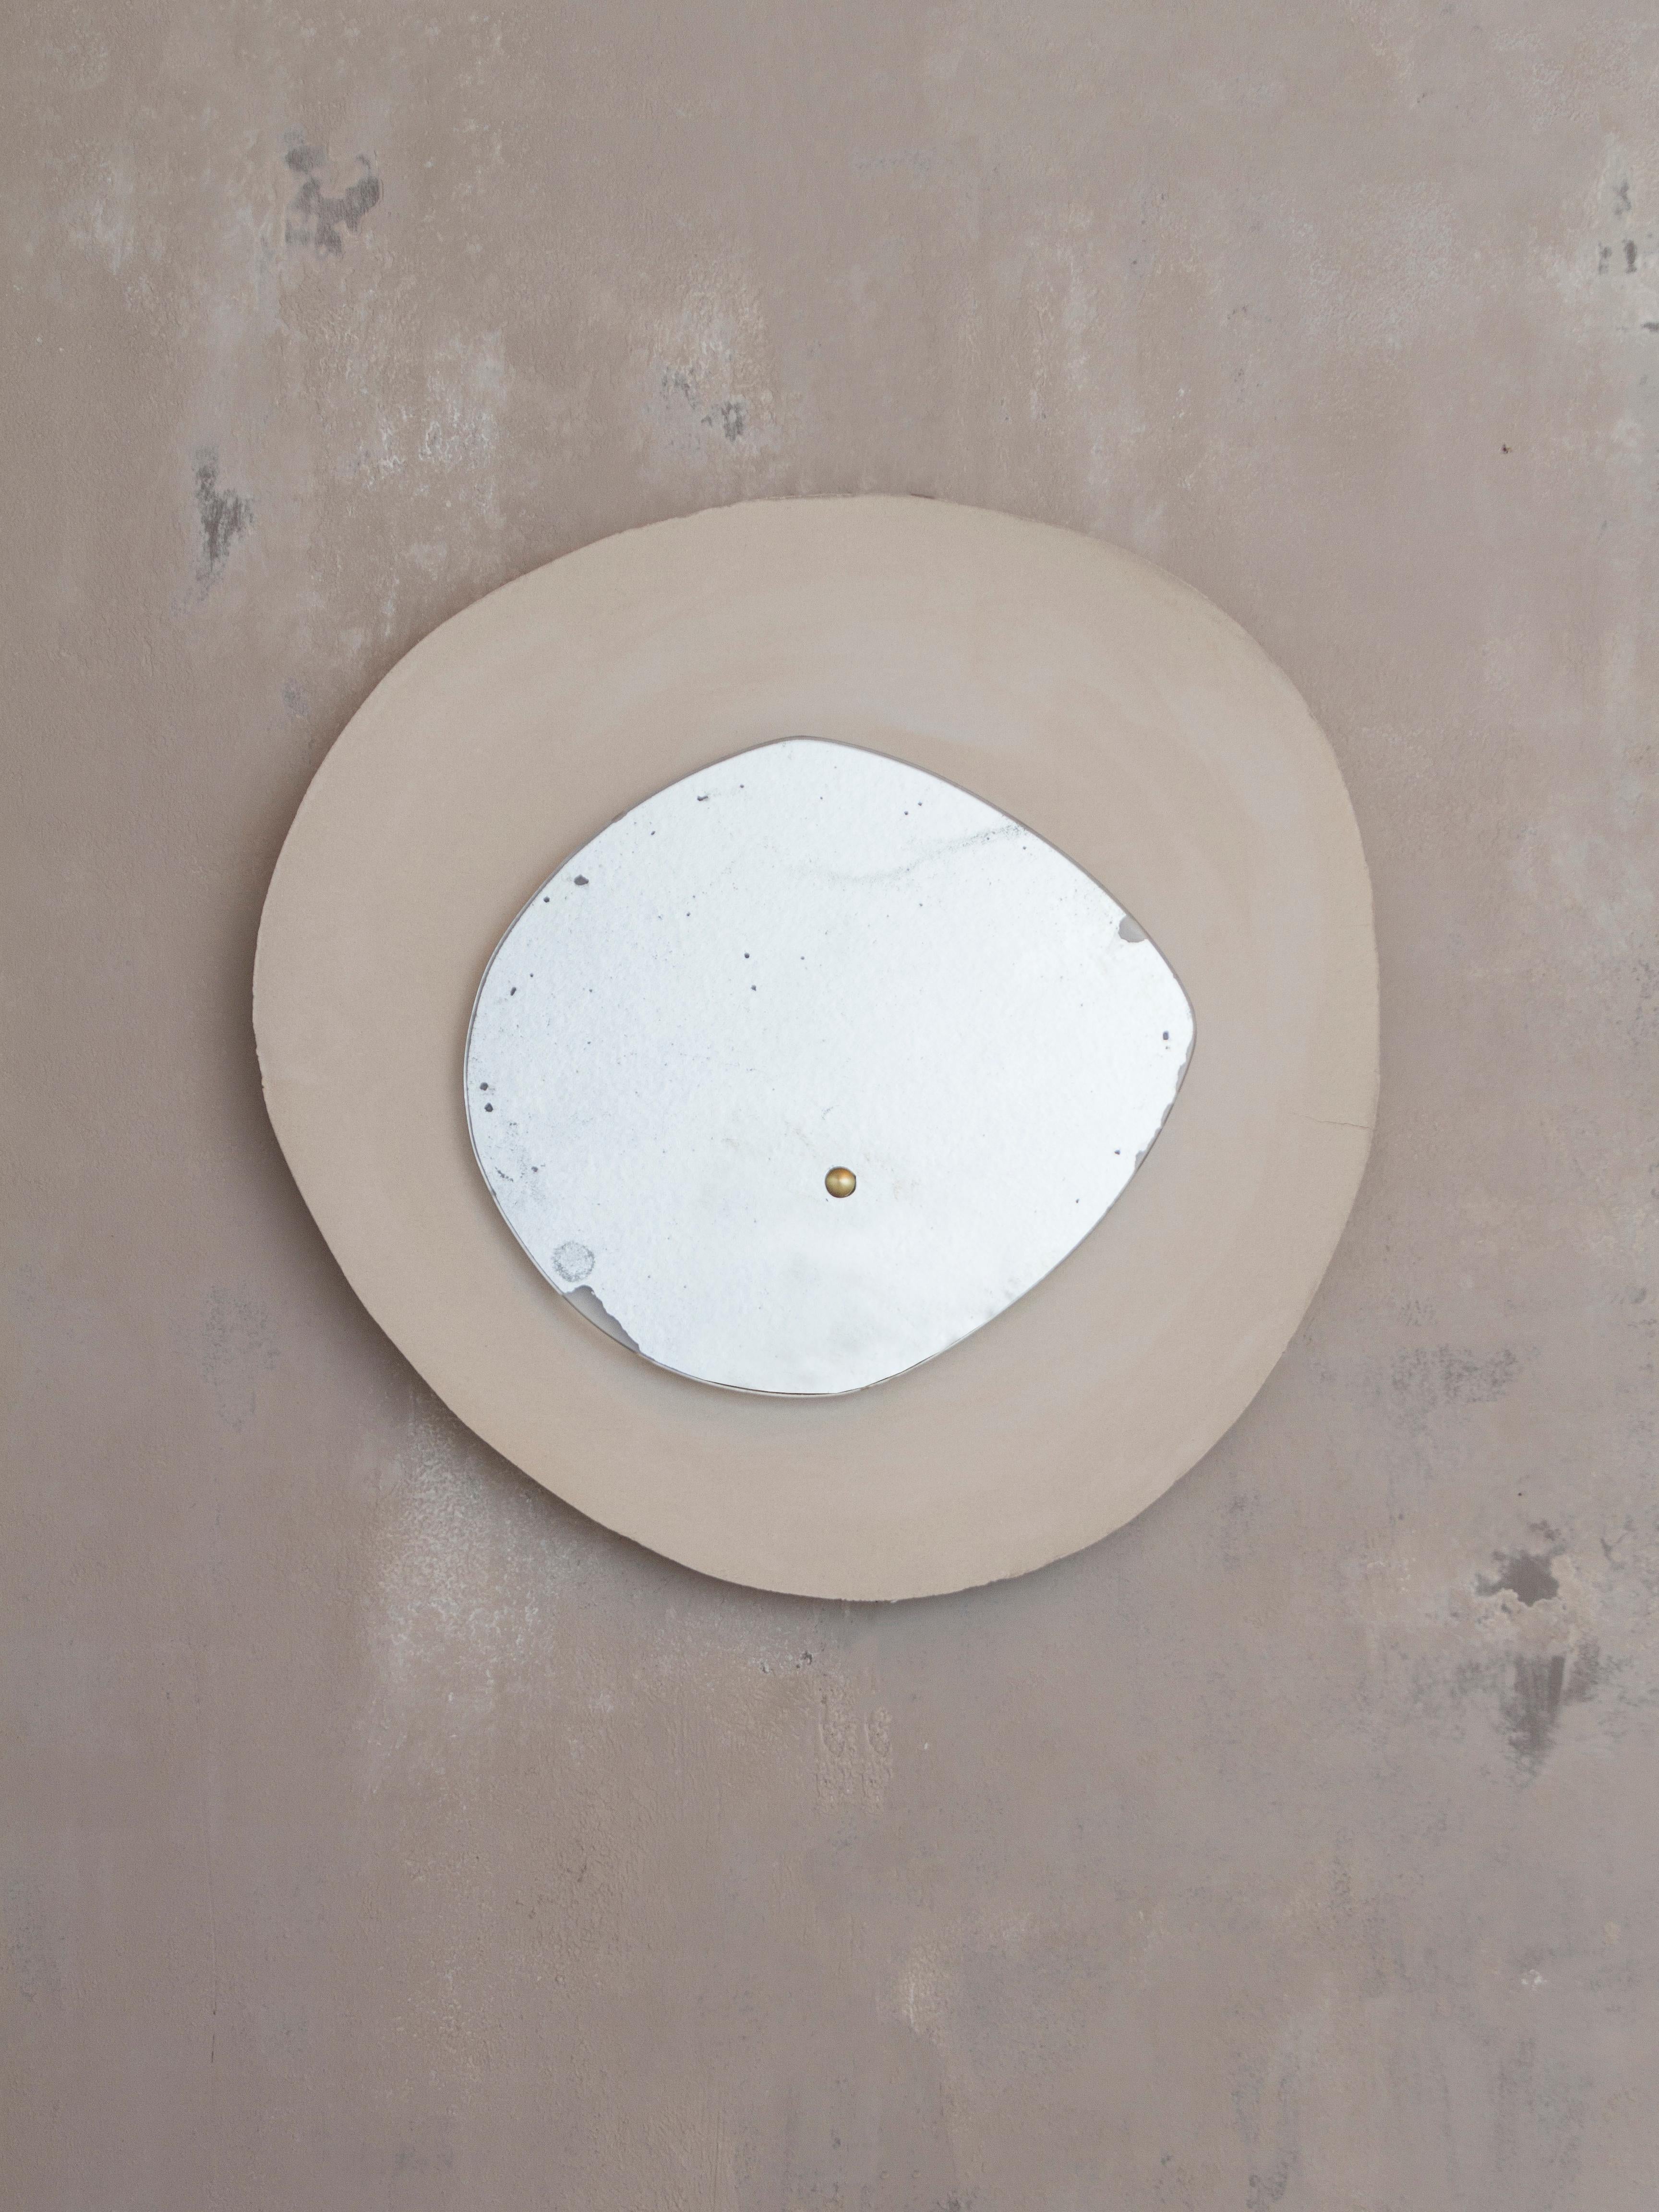 Echo #2 wall light by Margaux Leycuras
One of a Kind, Signed and numbered
Dimensions: D 6 x W 55 x H 55 cm 
Material: Ceramic, sand stoneware top with a porcelain engobe finish and old mercury mirror.
The piece is signed, numbered and delivered